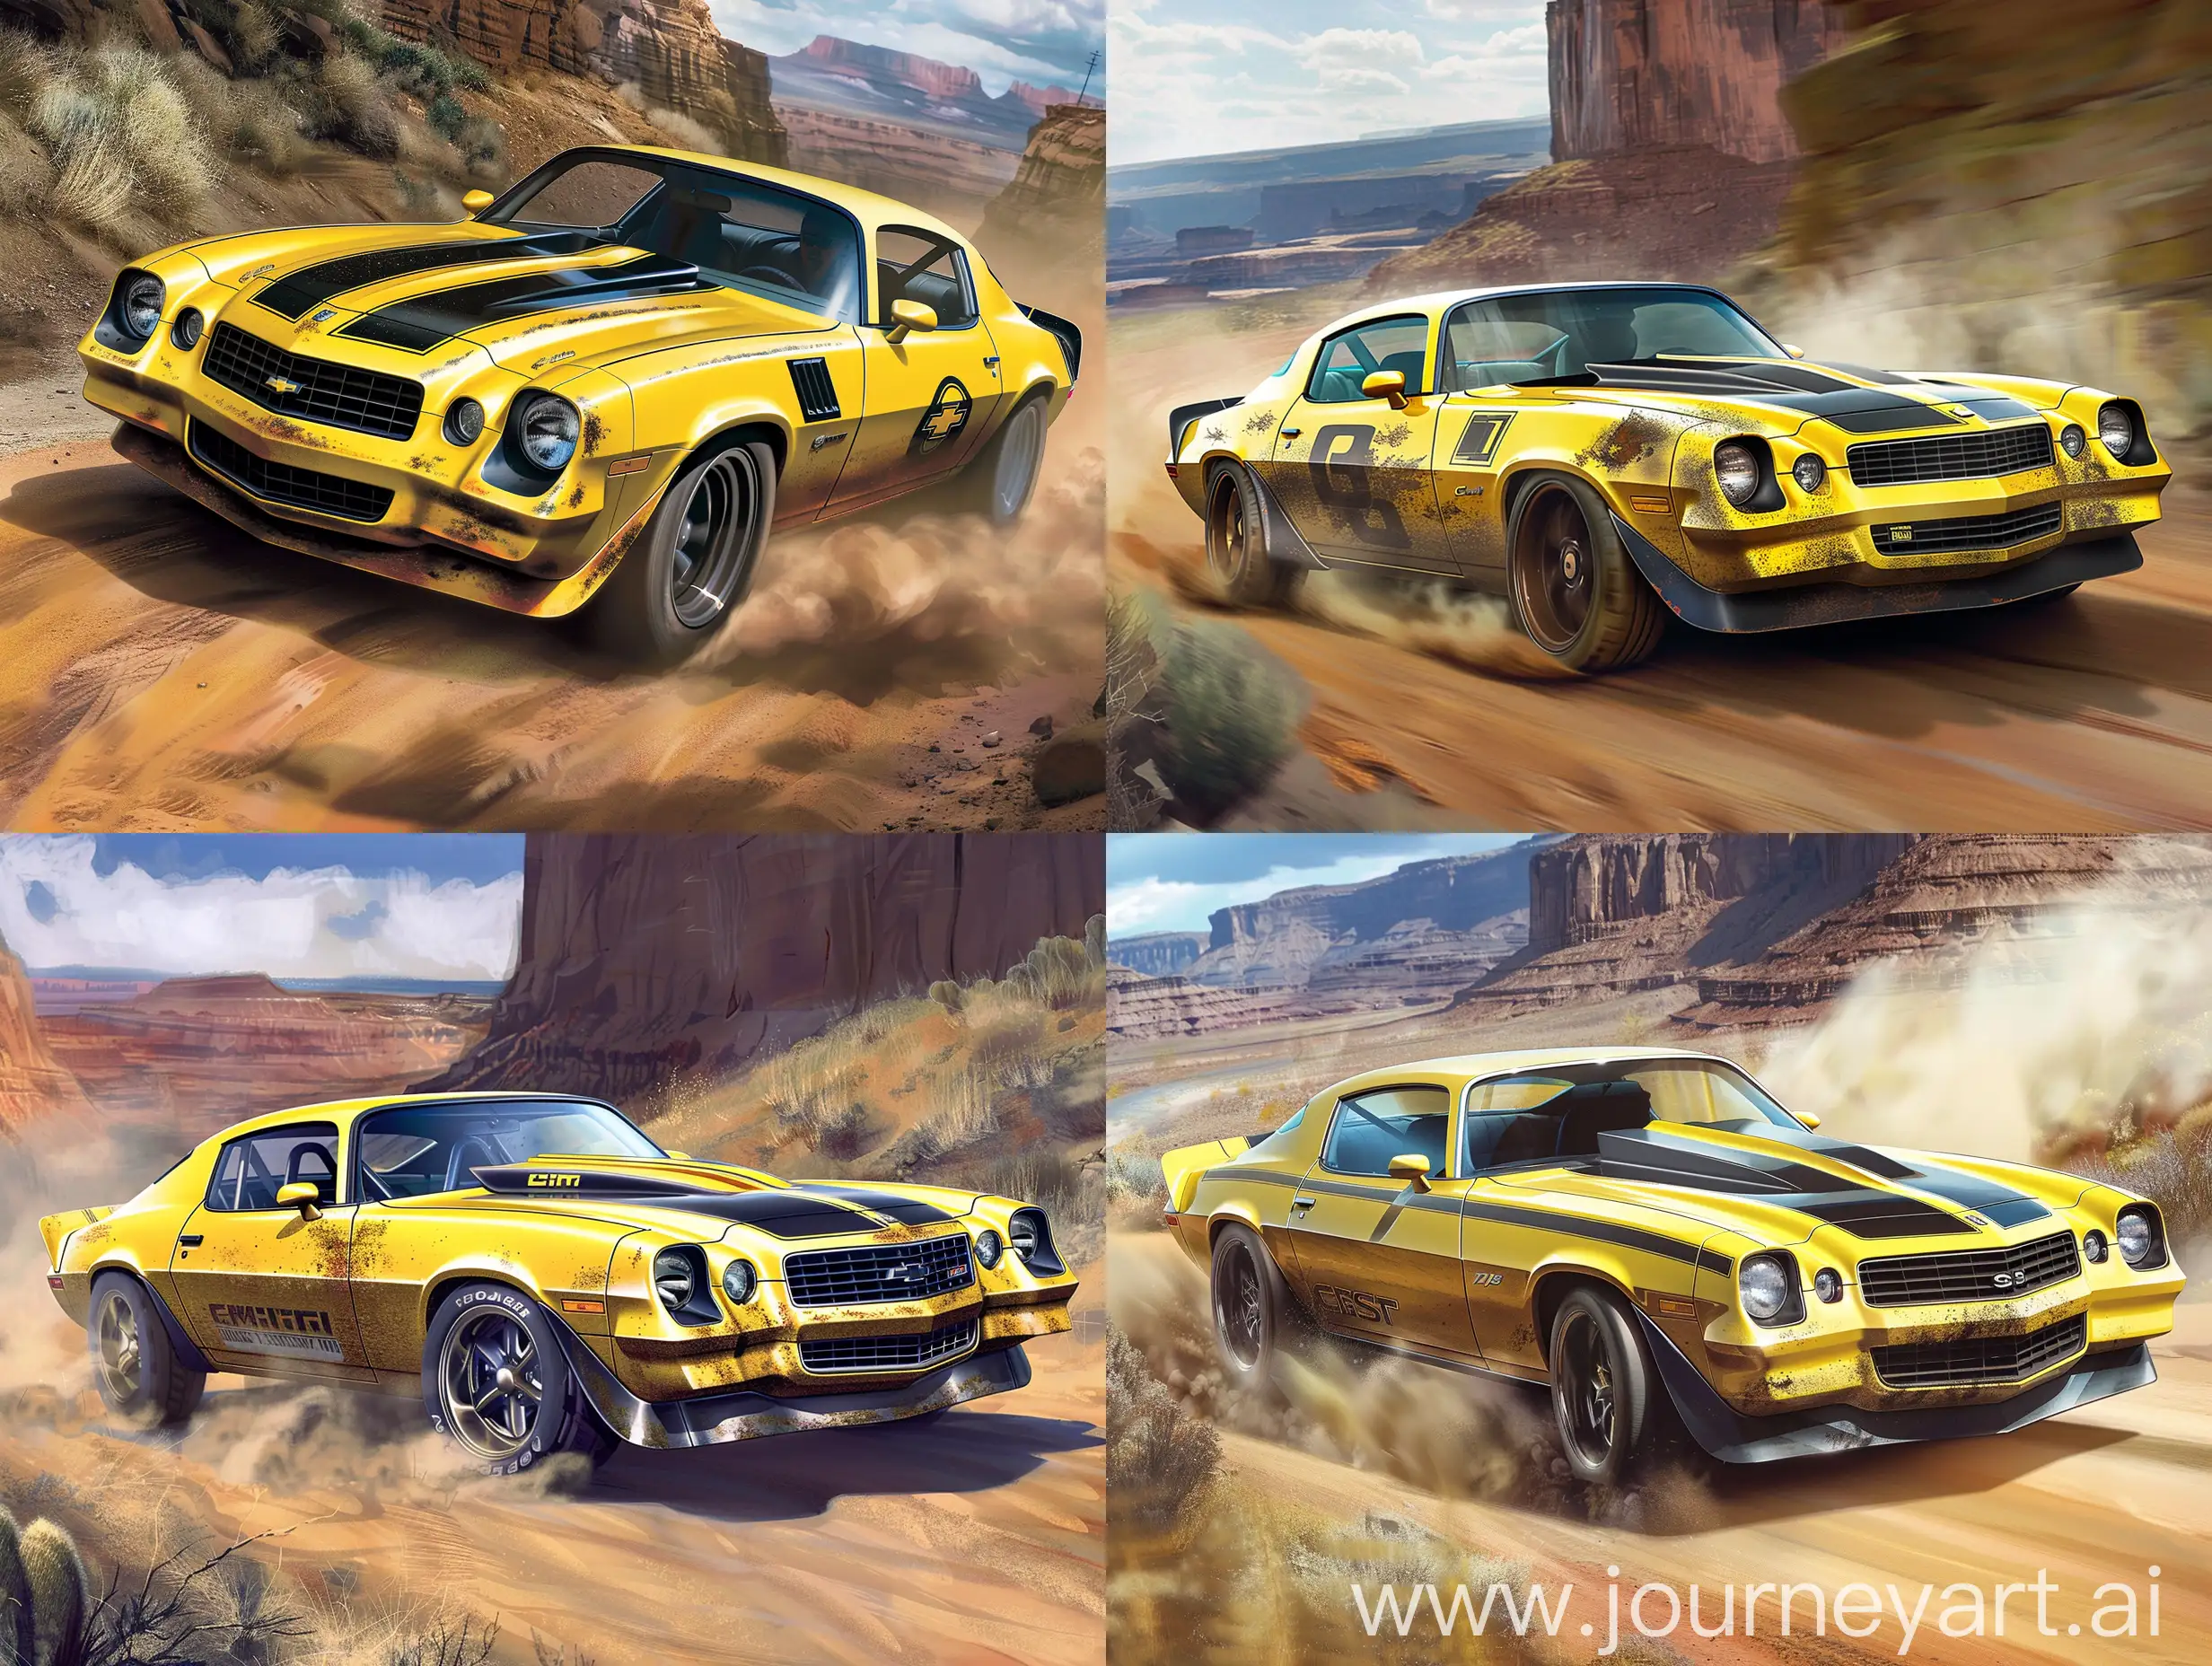 1977 chevrolet camaro yellow with black racing stripes a little rusted, going fast on dirt road, wallpaper, Illustration Yellow patterns Black Racing Stripes, Canyon background, dust coming out, Illustration in Drawing style